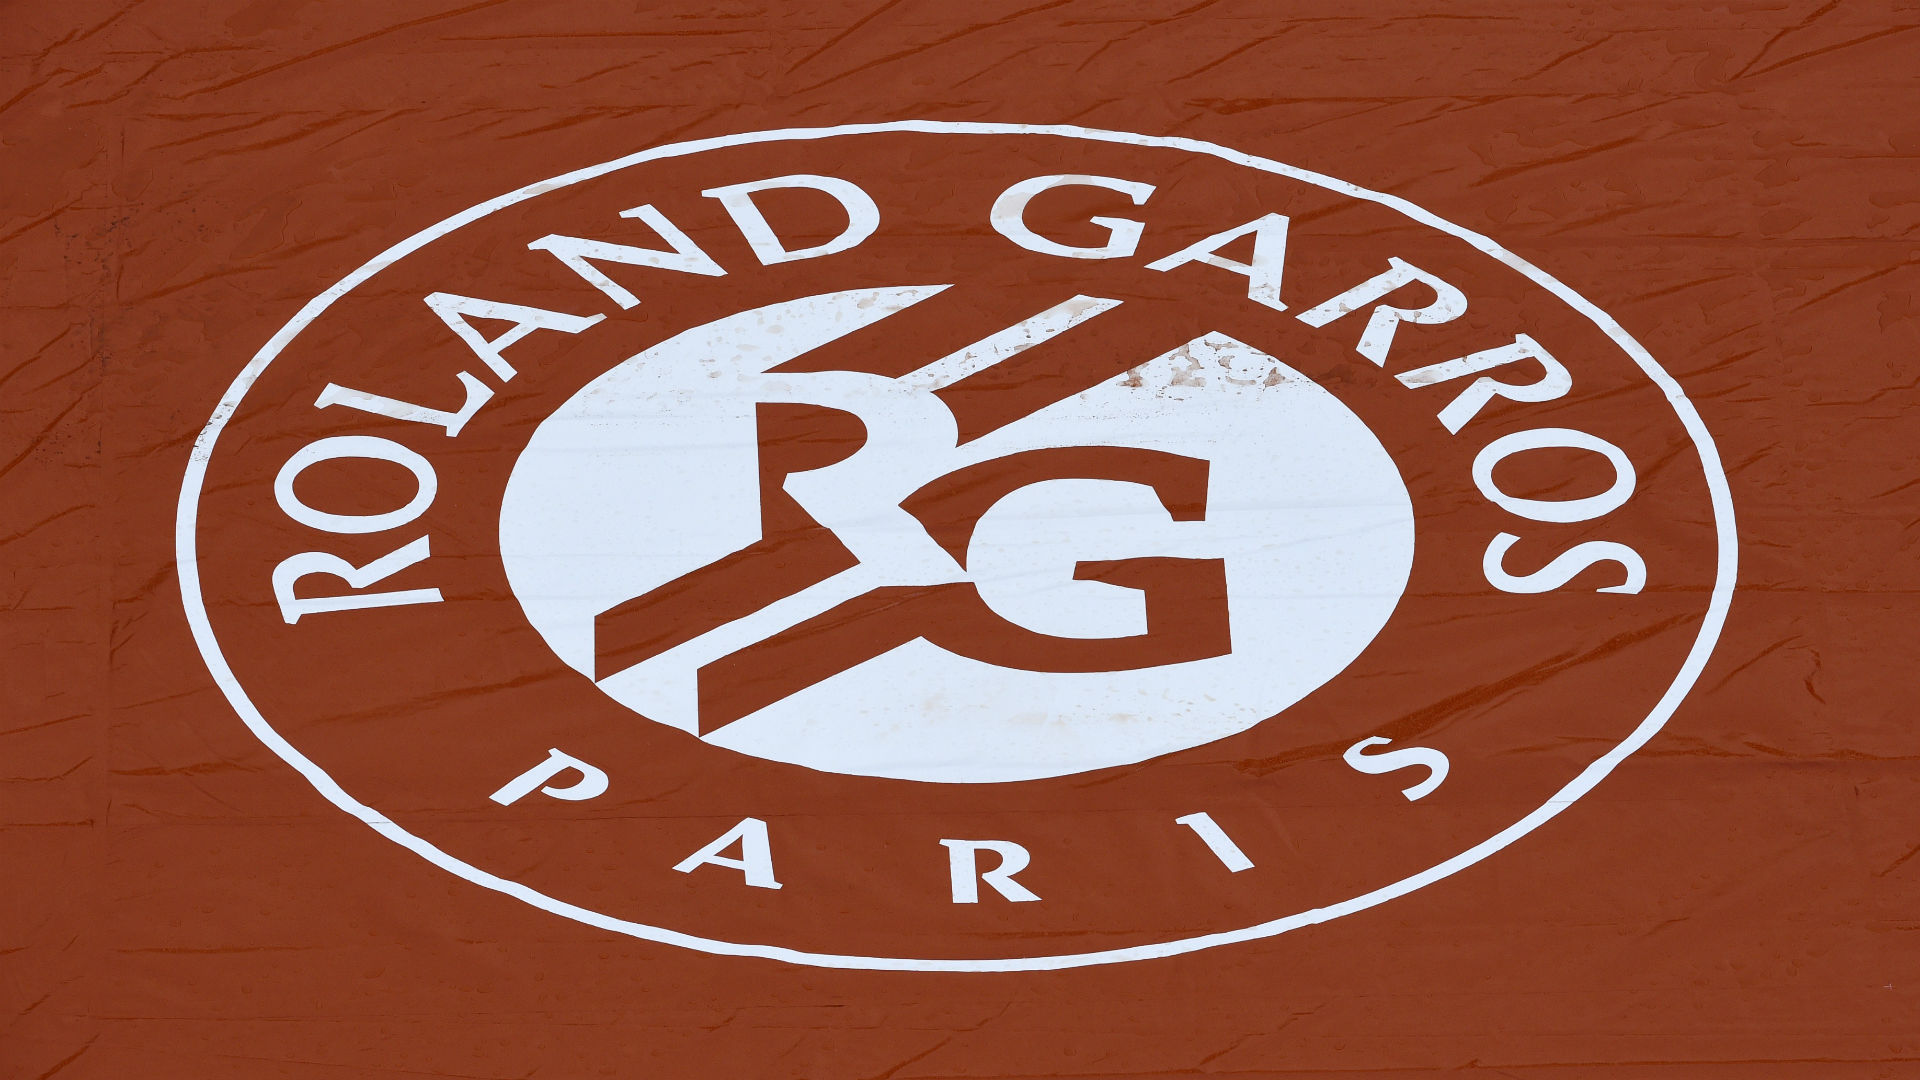 French Open 2018: Results, schedule, how to watch live at Roland Garros